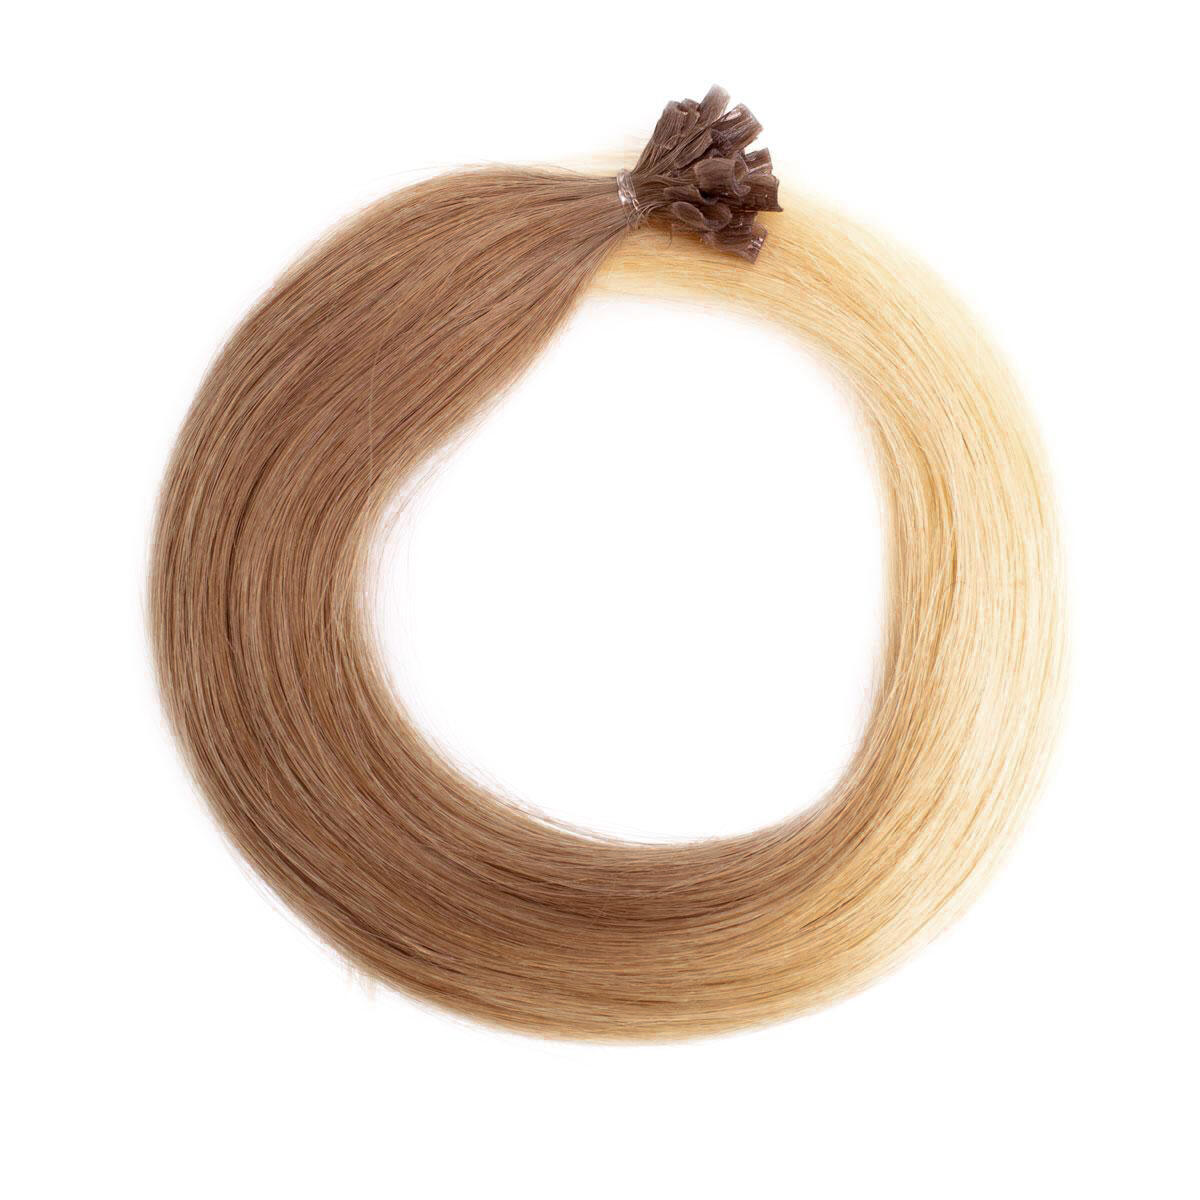 Nail Hair O7.3/10.8 Cendre Ash Blond Ombre 60 cm